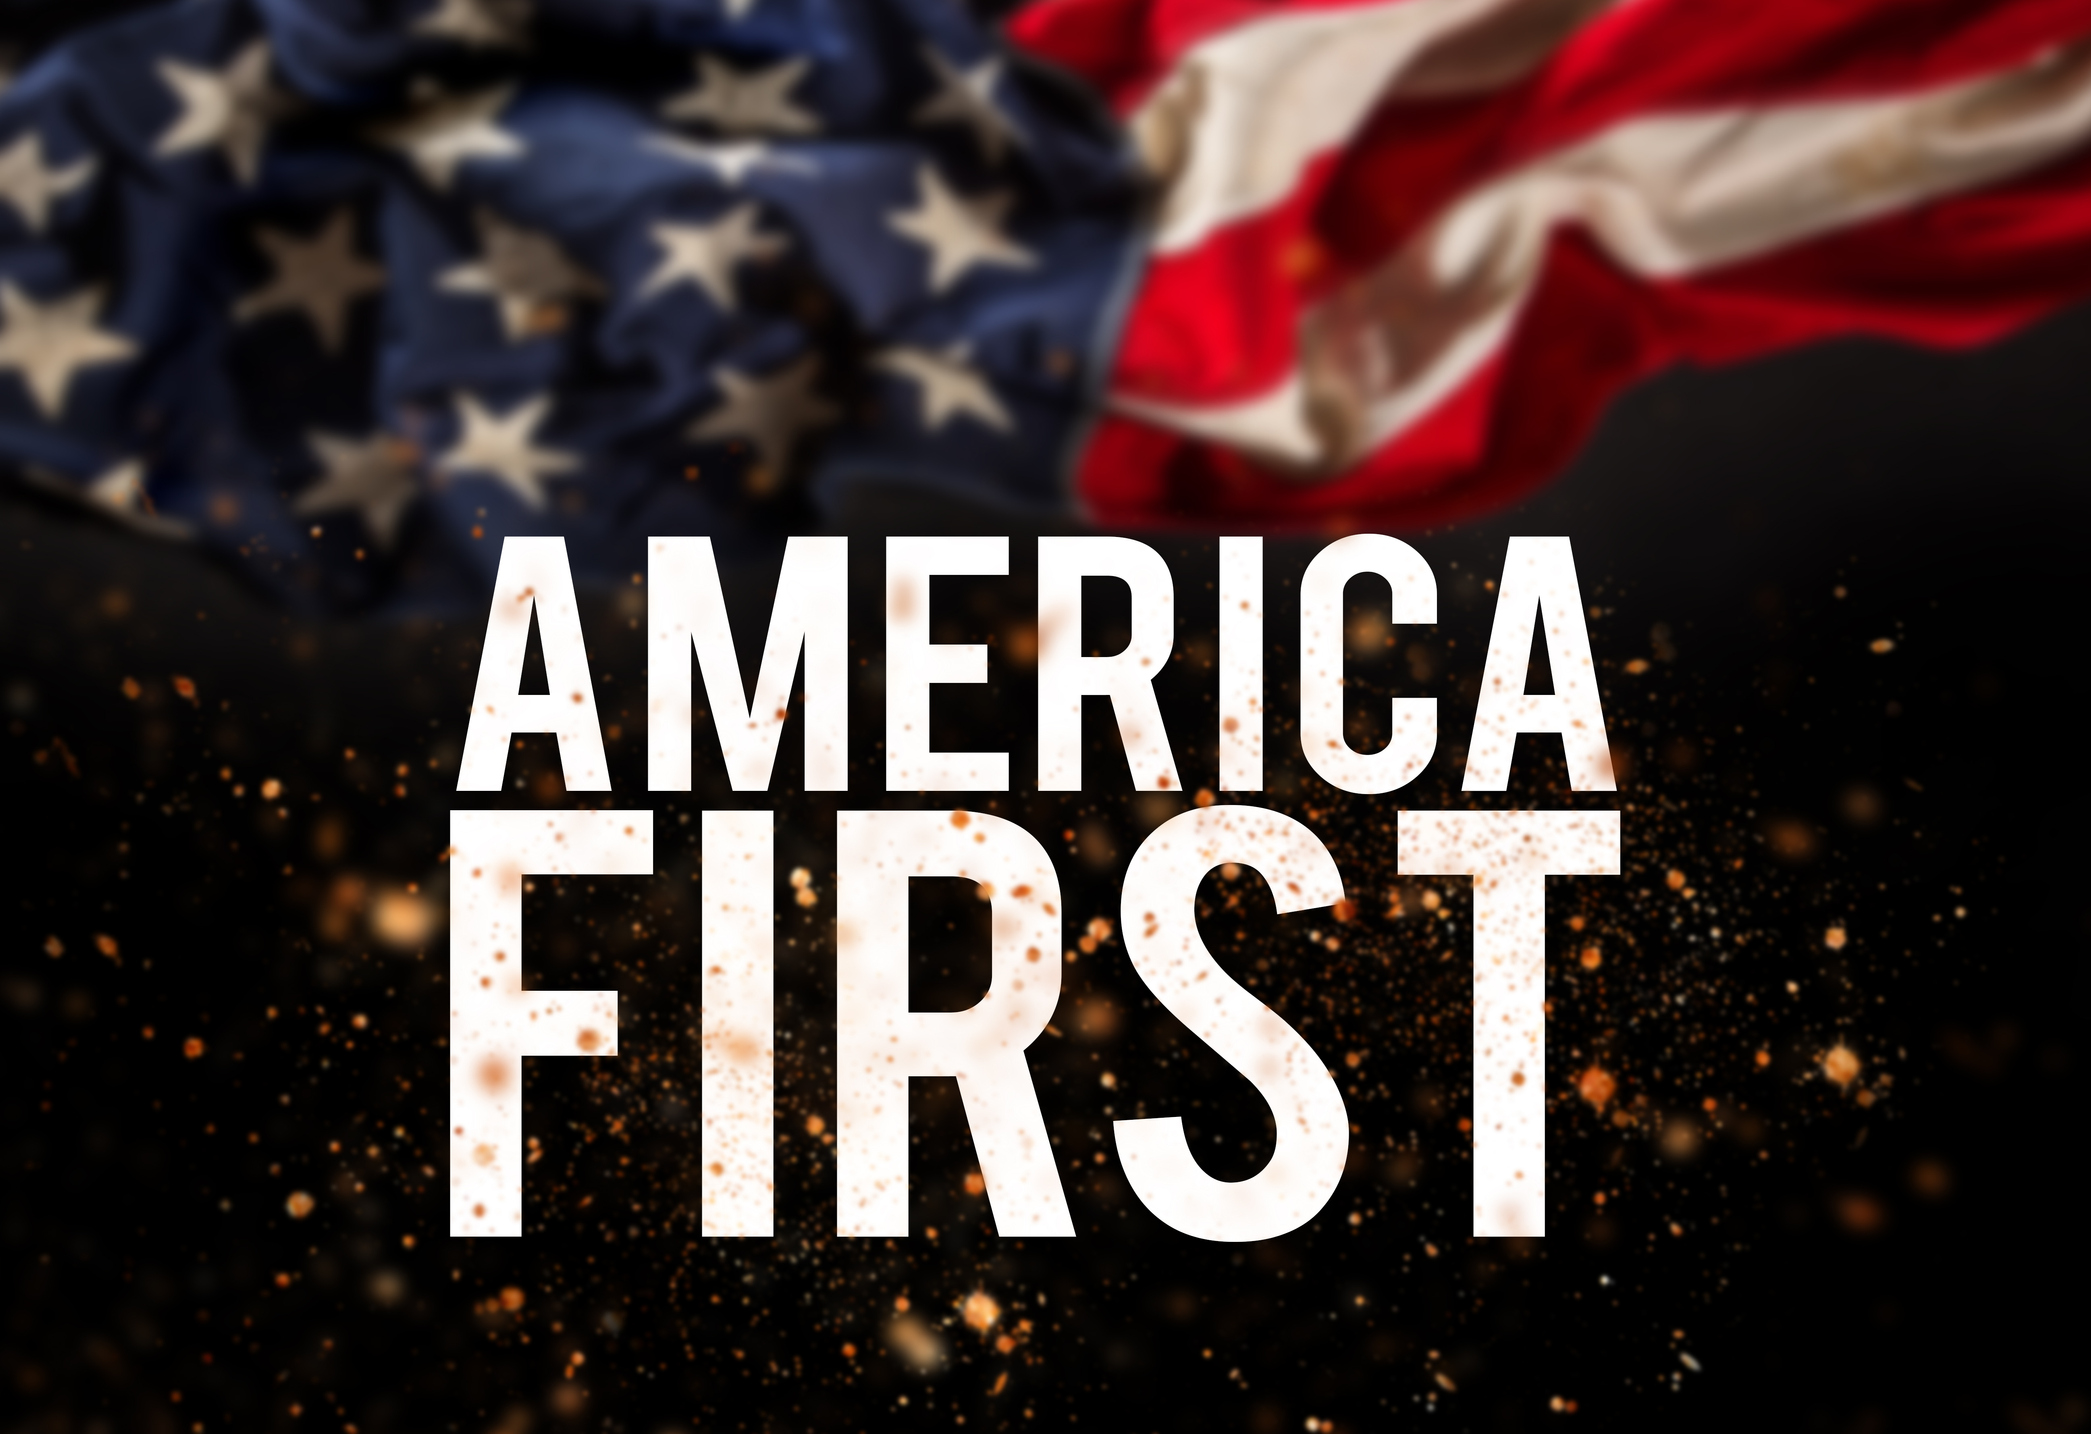 America first catcheword with american flag